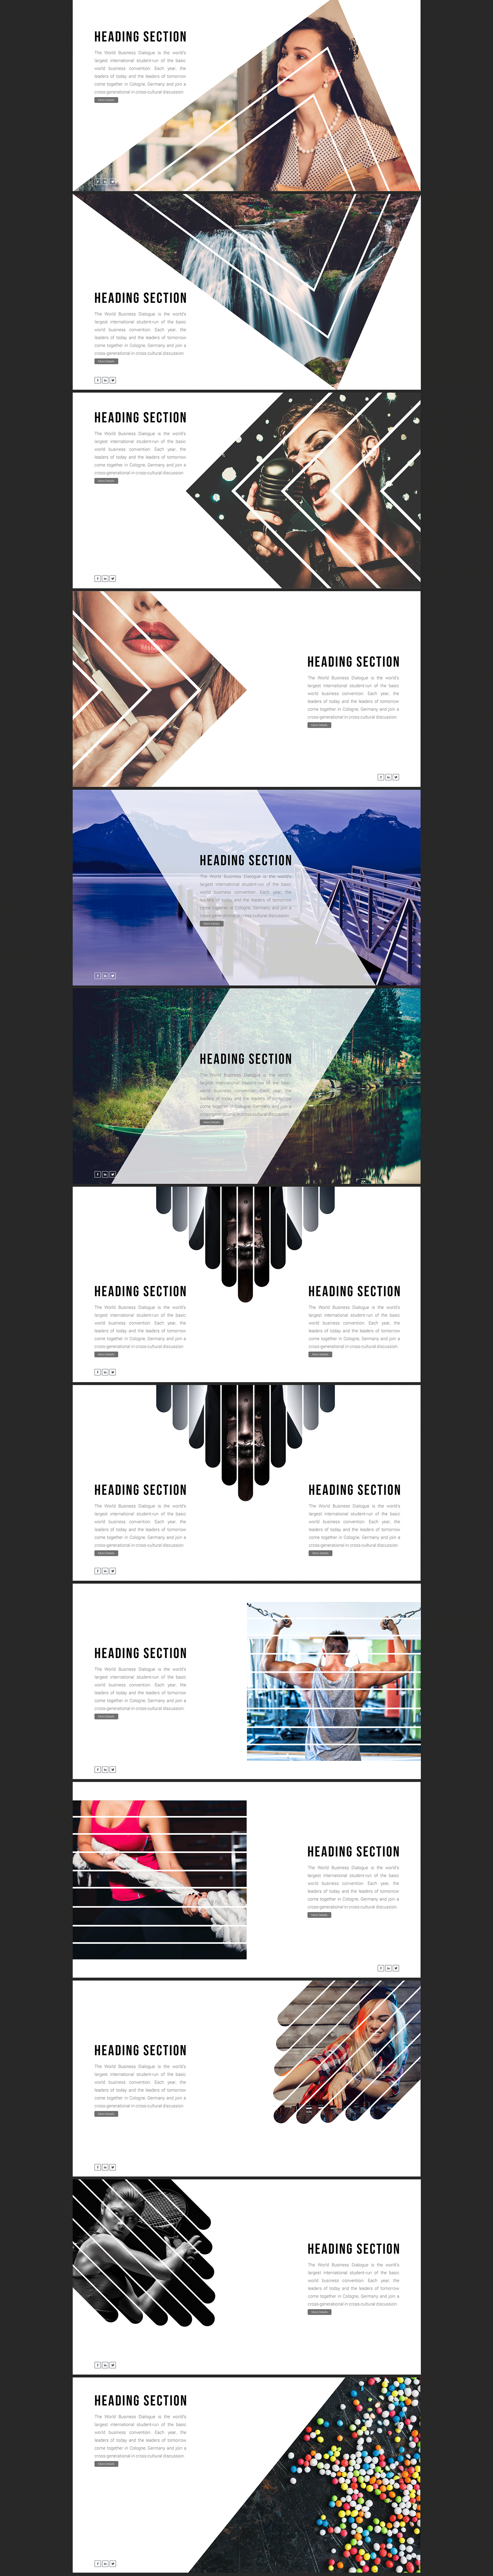 reflect Powerpoint Presentatin free Free Template free download minimal modern TREND DESIGN top sell item